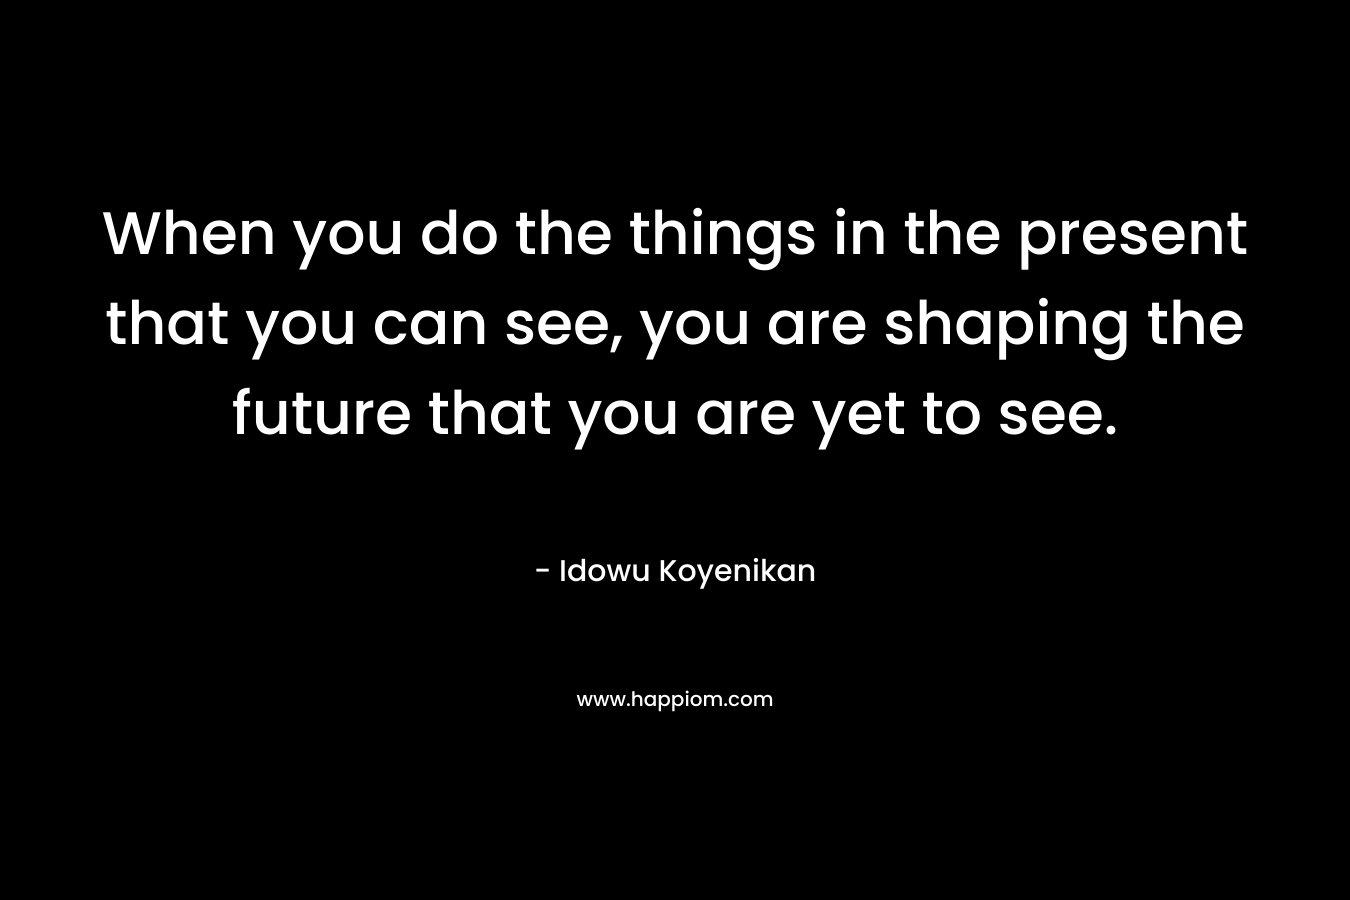 When you do the things in the present that you can see, you are shaping the future that you are yet to see.